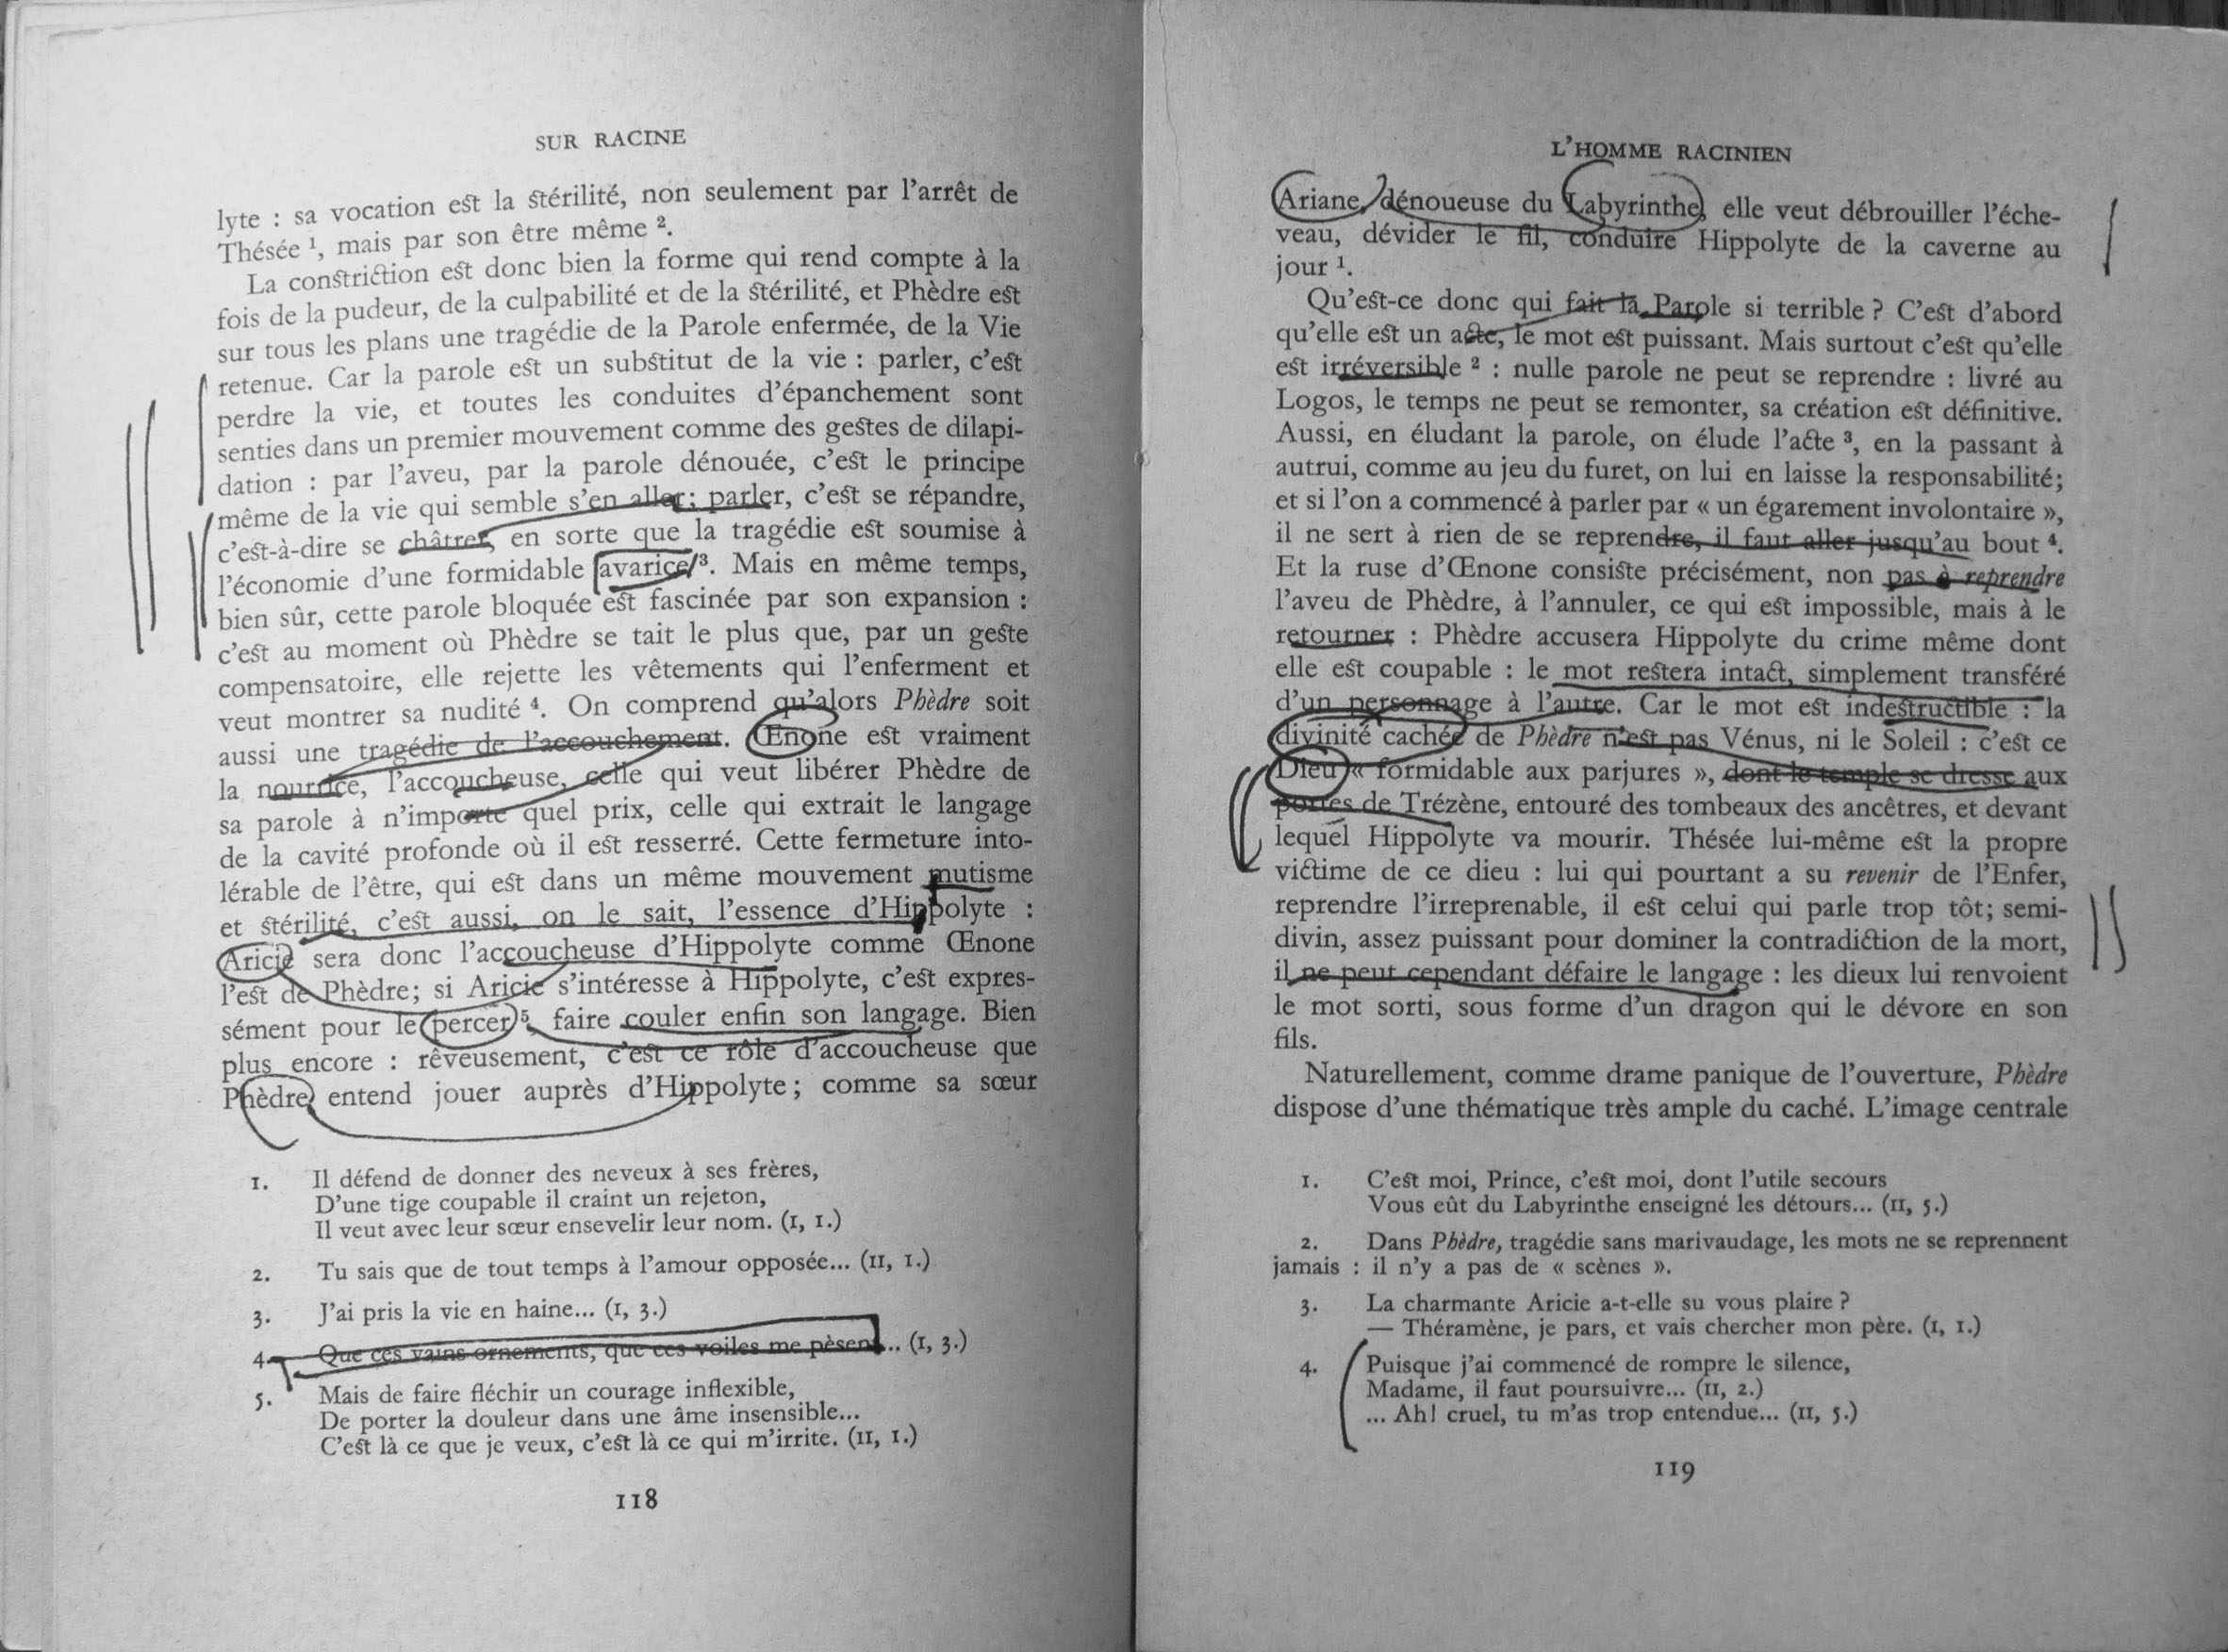 Derrida's annotations on a page from Sur Racine by Roland Barthes (Paris: Editions du Seuil, 1963).